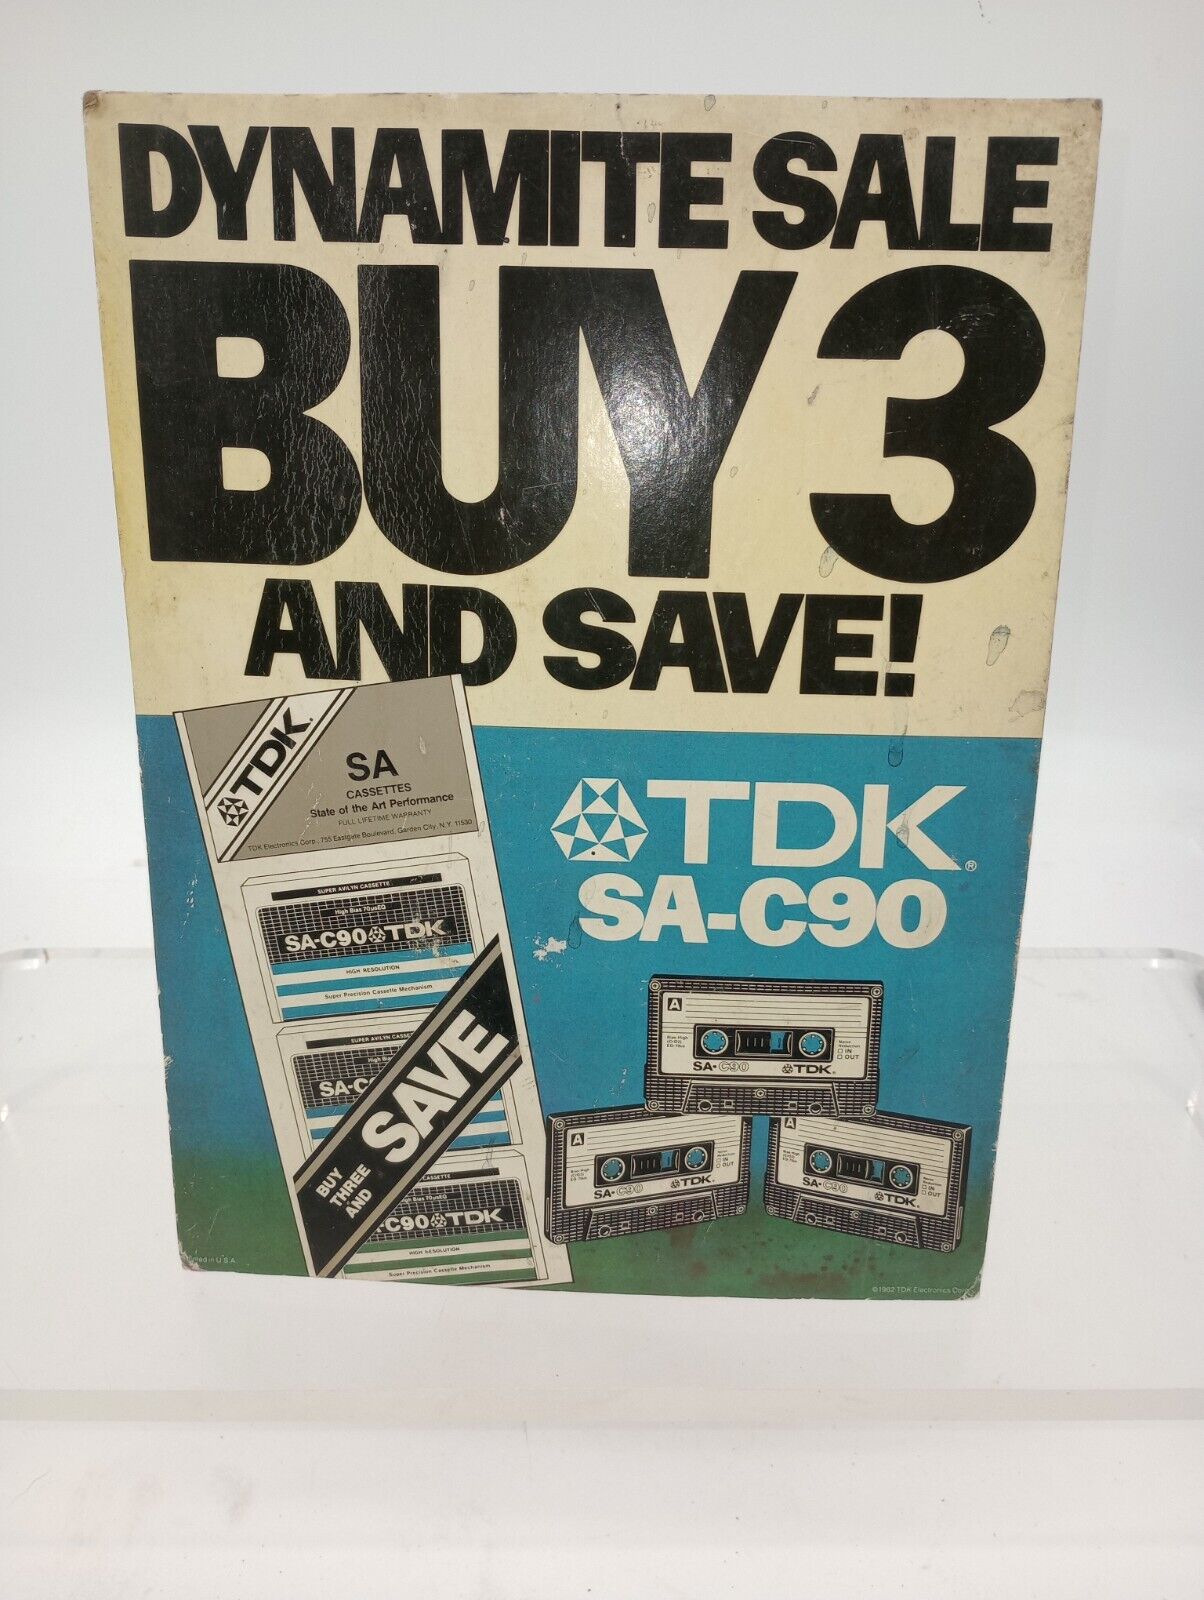 Vntg 1982 TDK SA-C90 Cassette Tapes Dynamite Sale Store Stand Up Advertising 